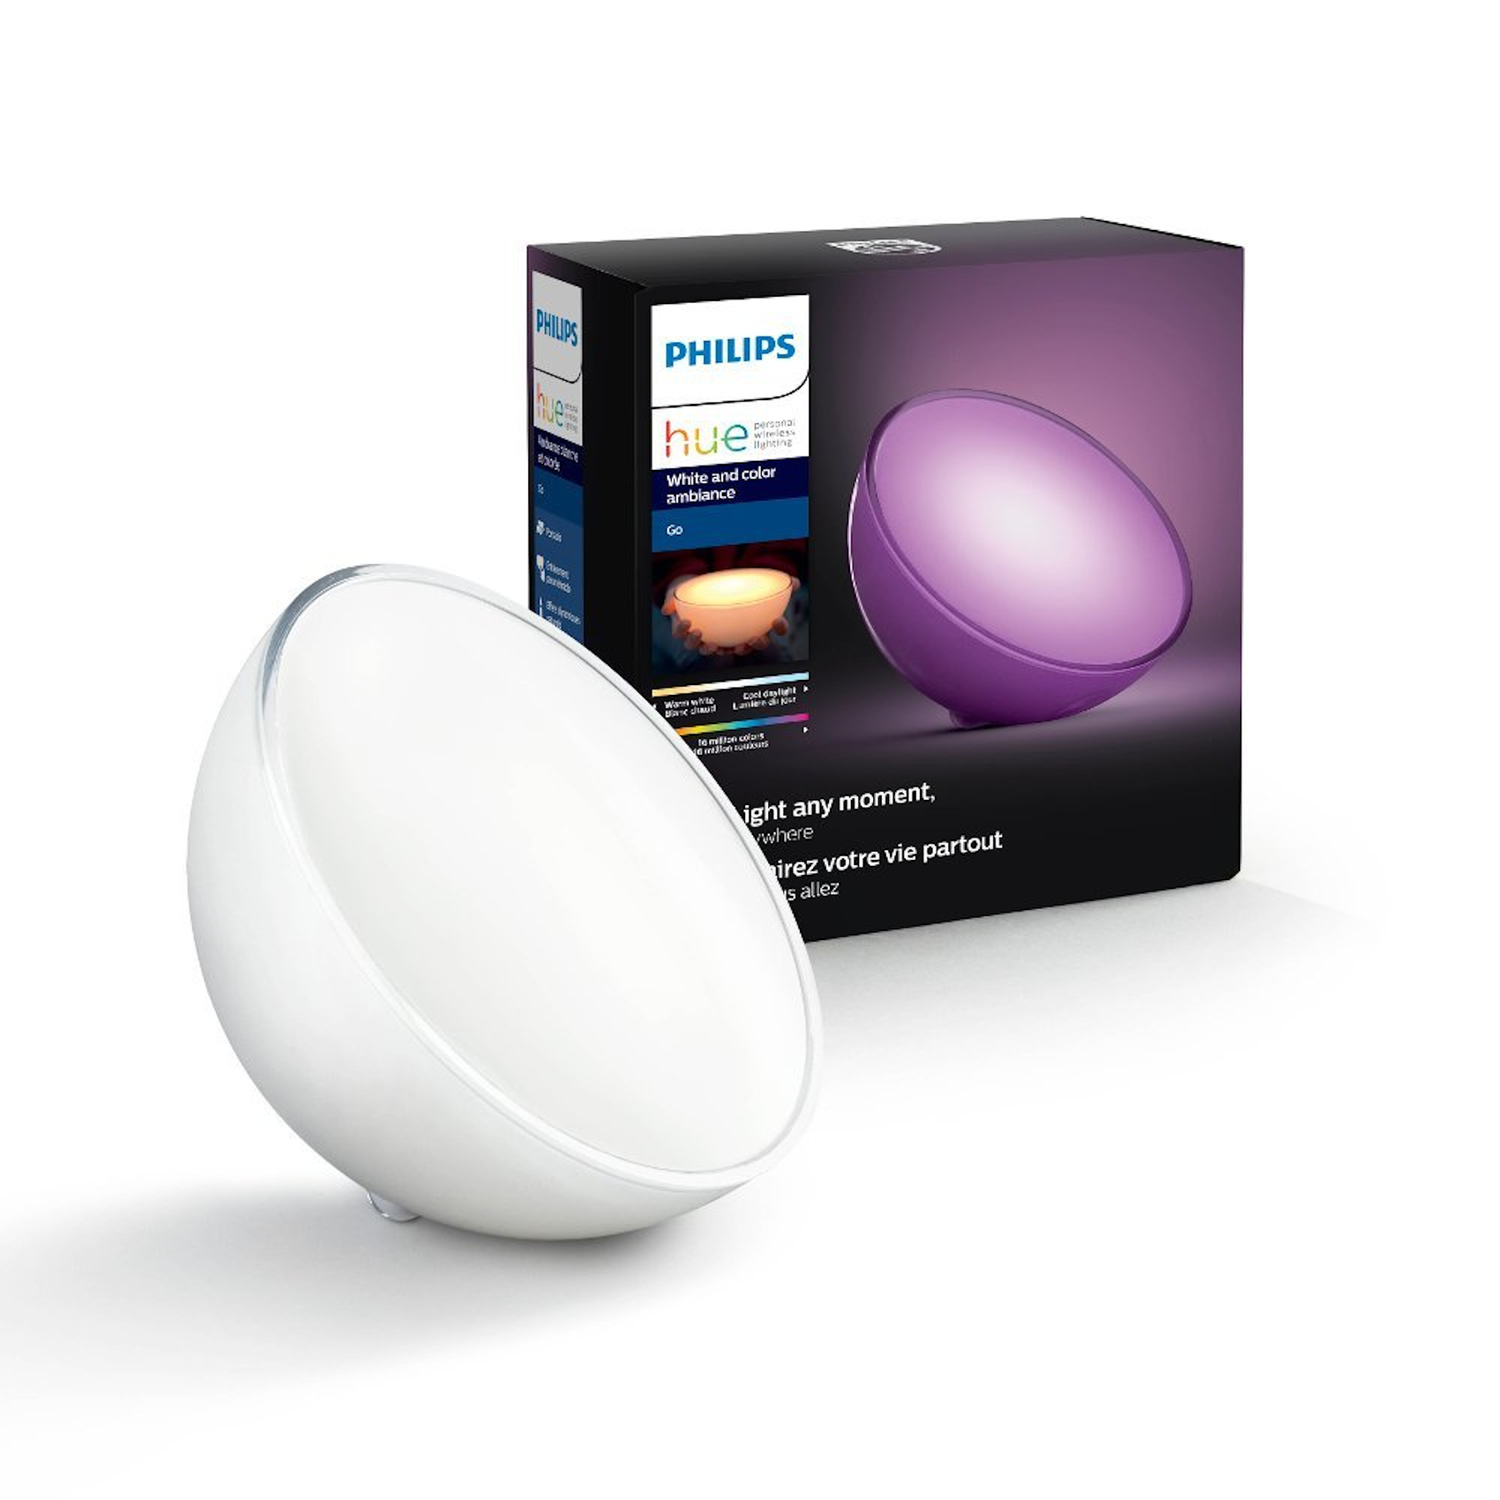 Photos - Desk Lamp Philips Hue 8.27 in. White Portable Table Lamp 7602031 